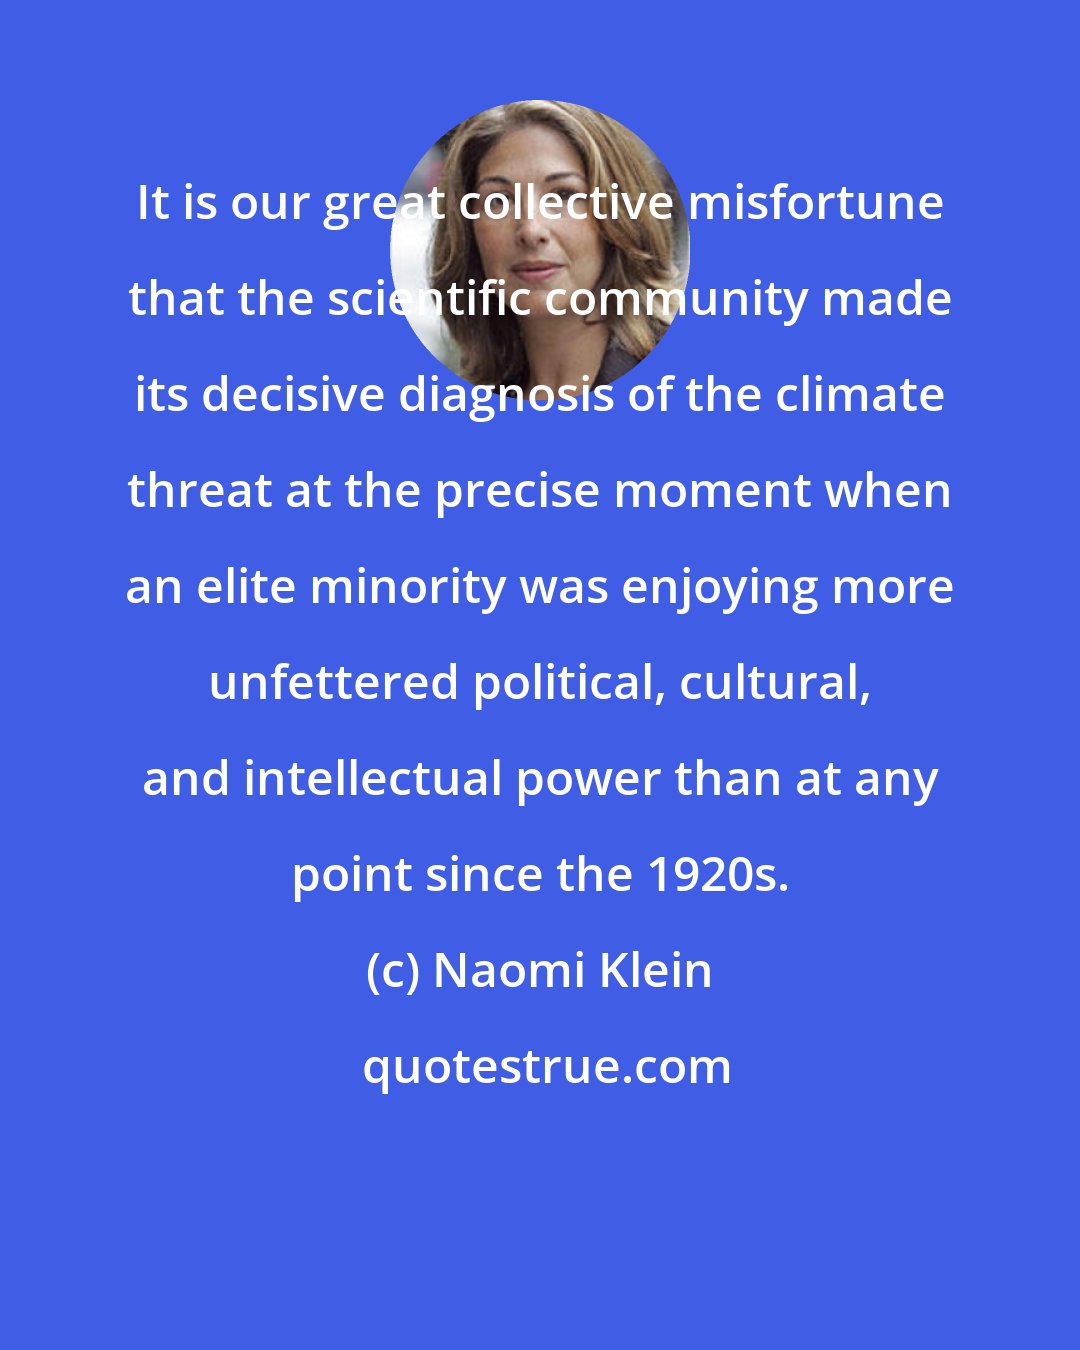 Naomi Klein: It is our great collective misfortune that the scientific community made its decisive diagnosis of the climate threat at the precise moment when an elite minority was enjoying more unfettered political, cultural, and intellectual power than at any point since the 1920s.